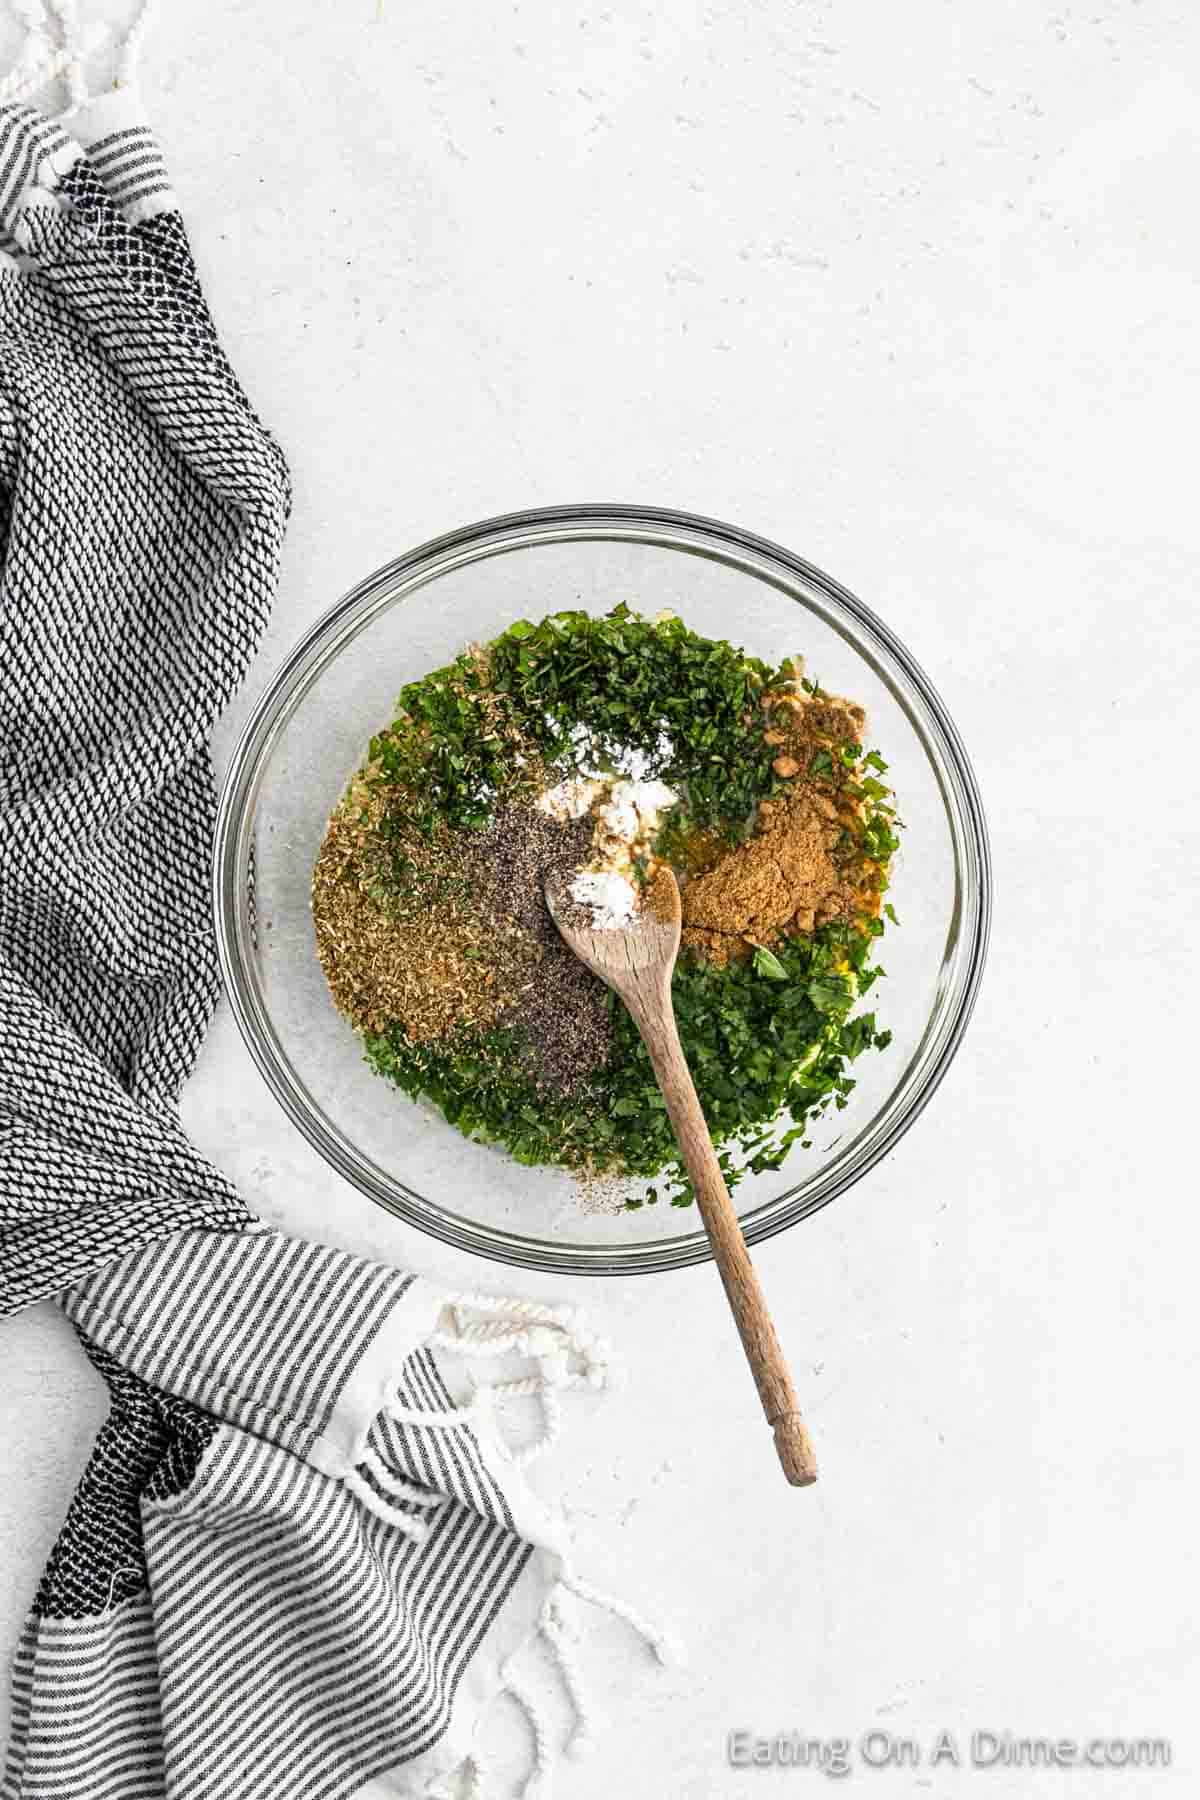 A clear glass bowl contains a blend of chopped herbs and spices, perfect for adding to a Crock Pot Cuban Mojo Pork Tenderloin recipe, with a wooden spoon resting inside. The bowl is placed on a light-colored surface next to a black and white striped kitchen towel.